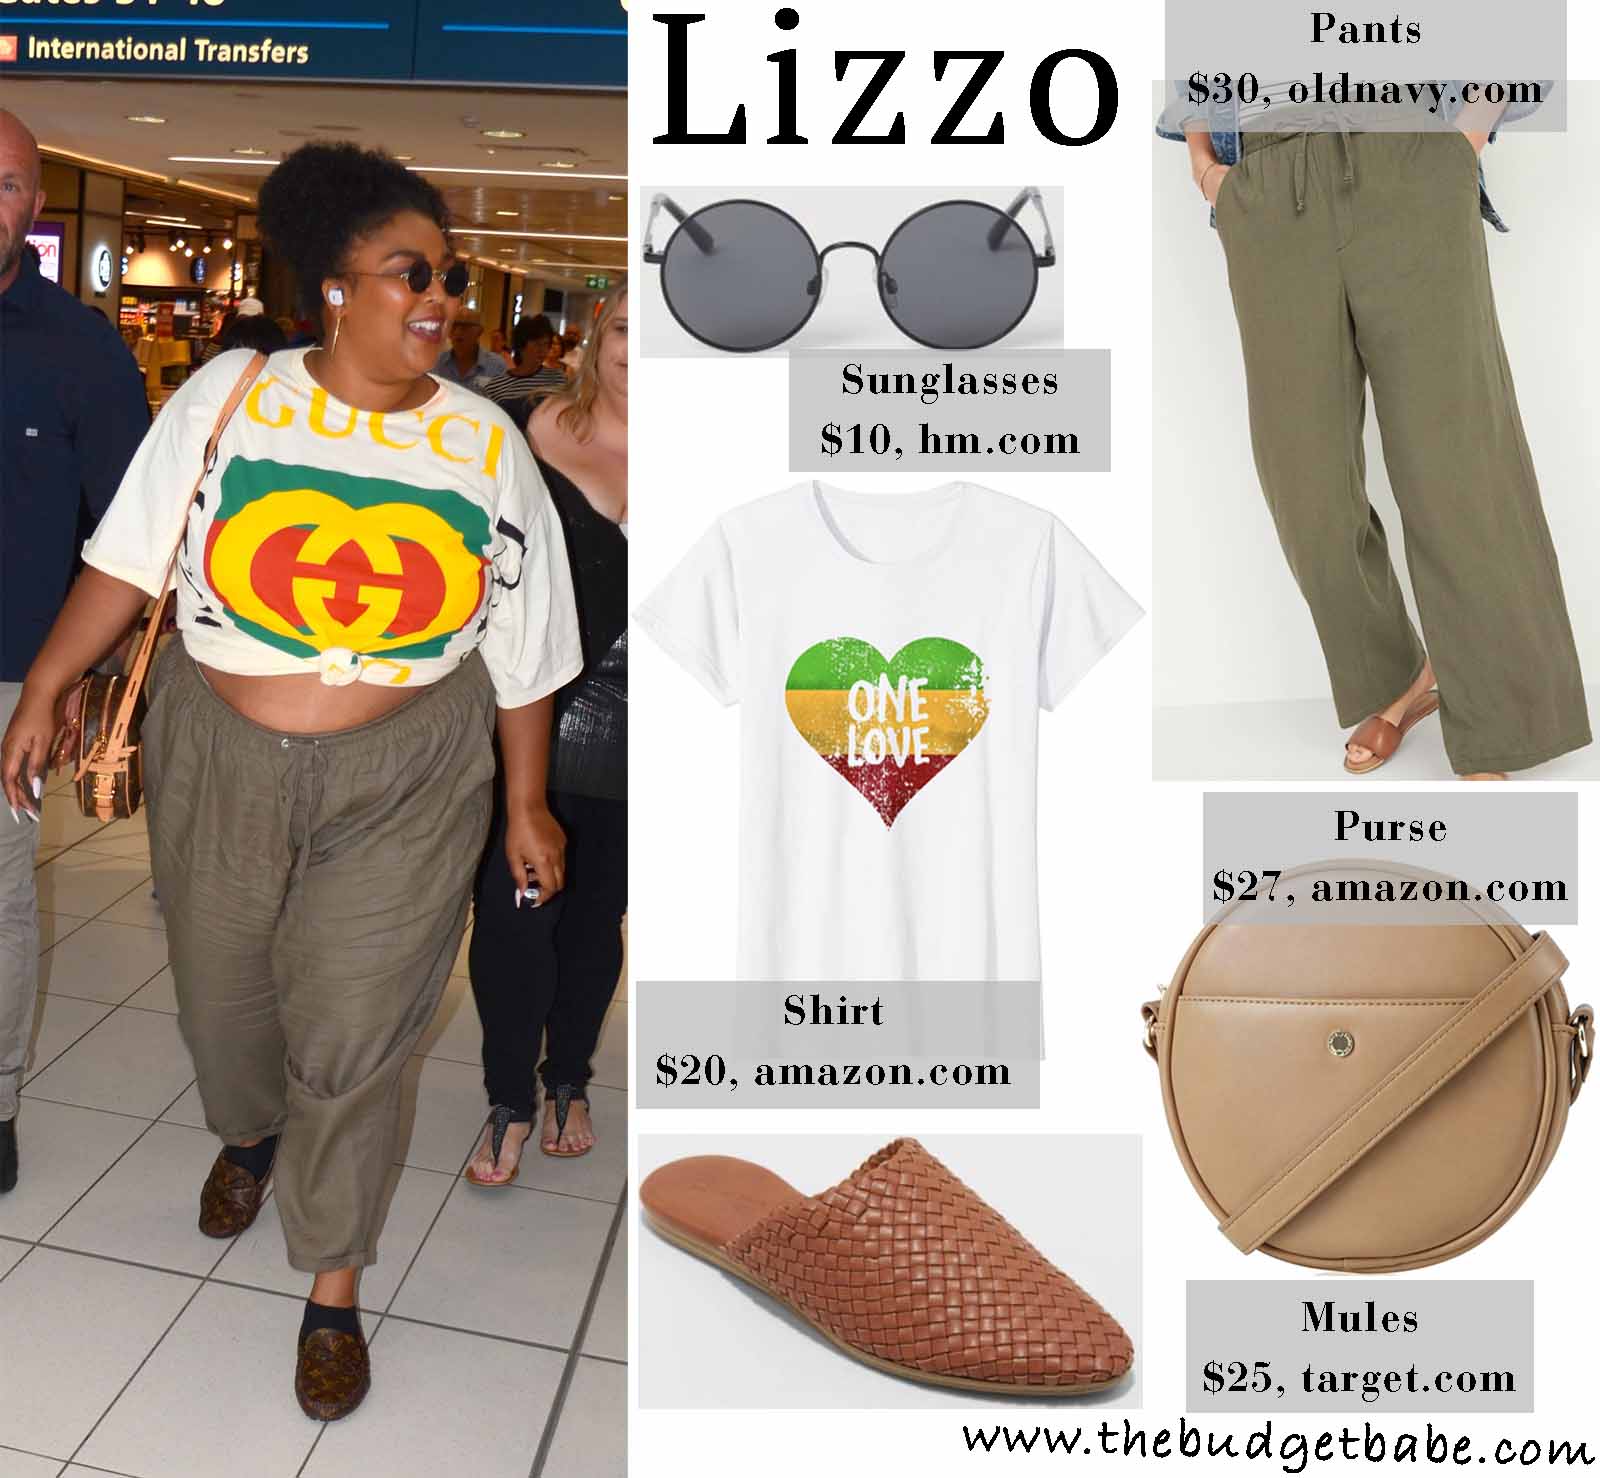 Lizzo styles a Gucci shirt perfectly!